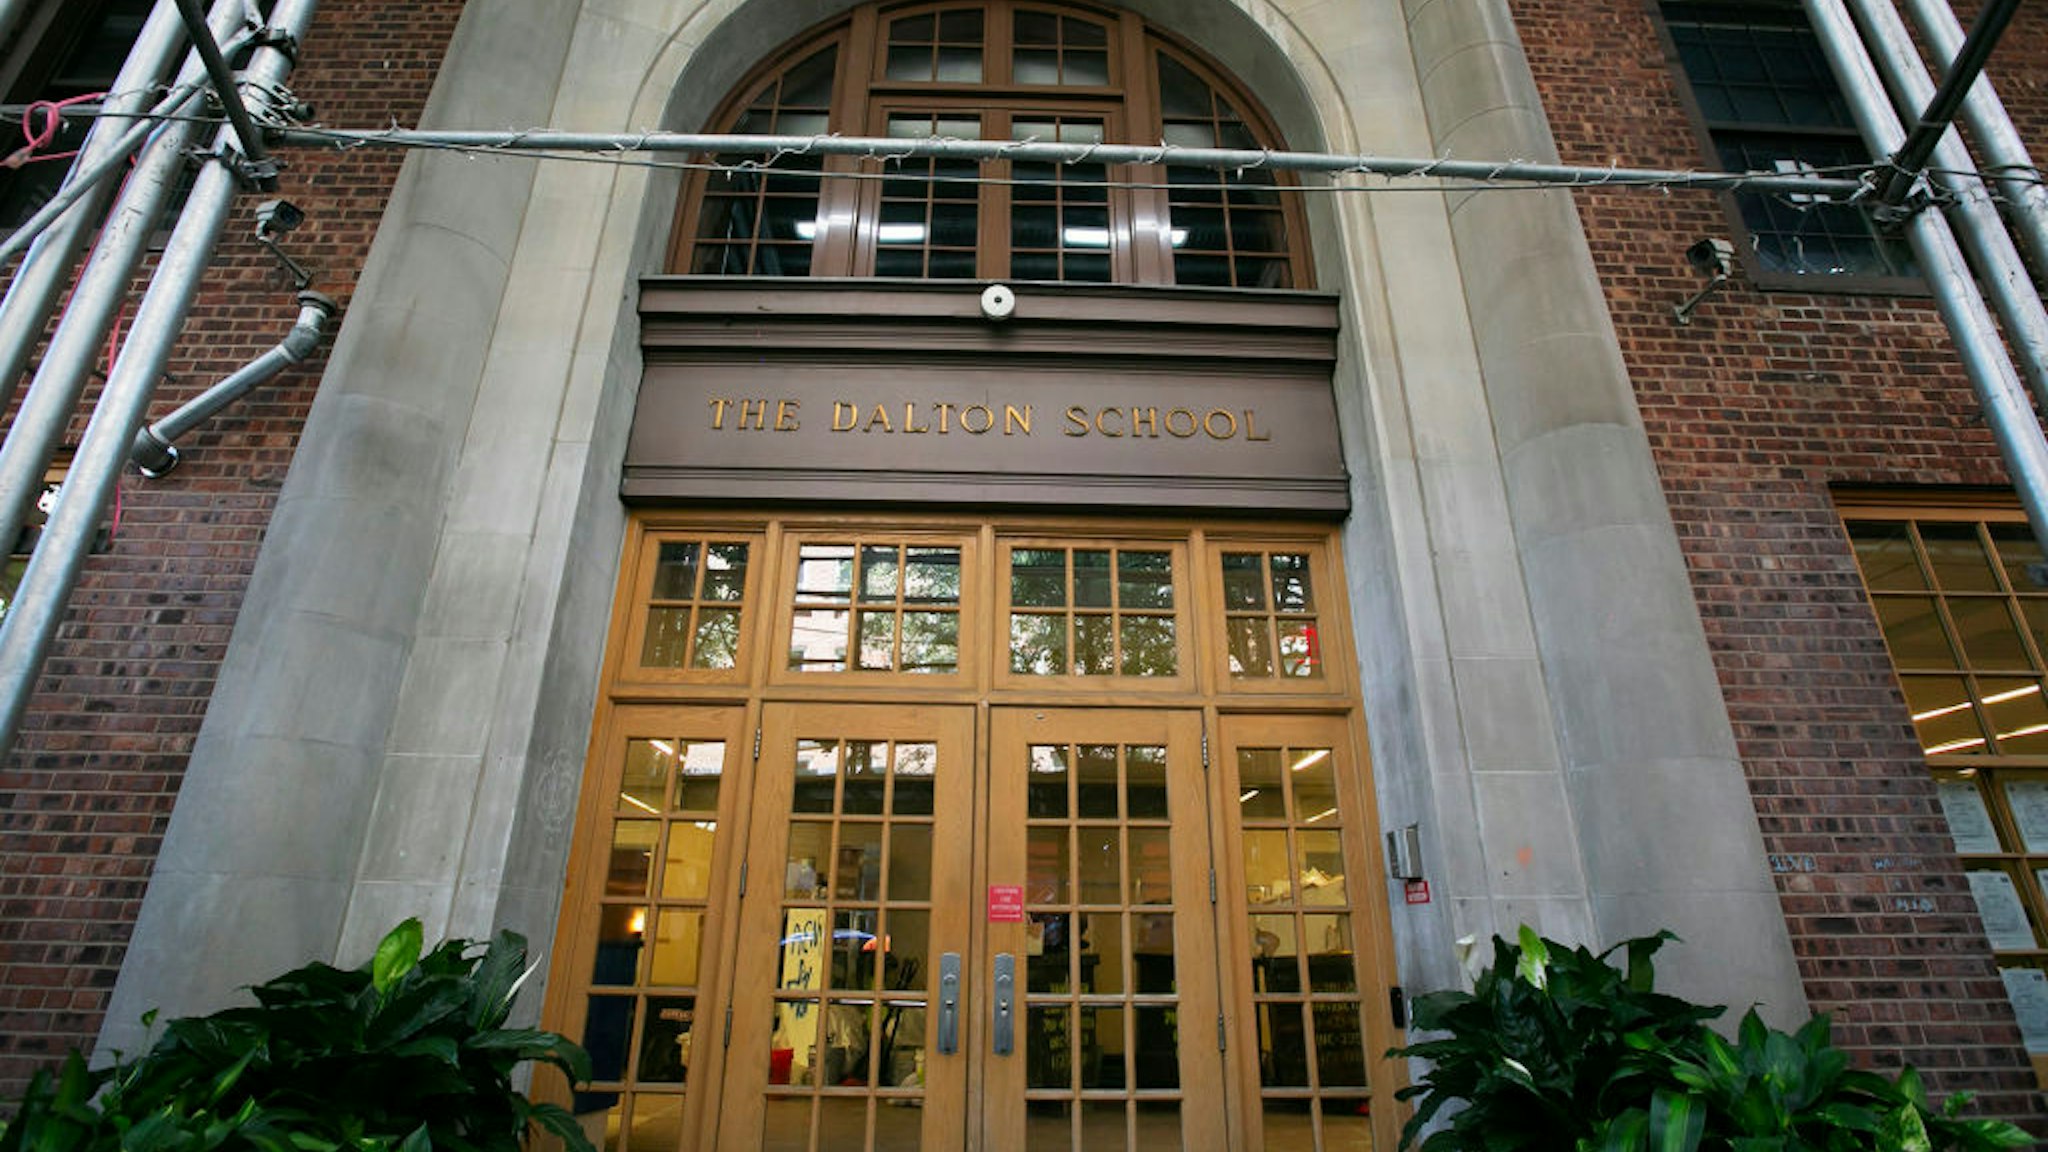 The children of some of New York's elite passed through the doors of Dalton School, a private college preparatory school on New York City's Upper East Side. Notable alumni include Anderson Cooper, Claire Danes and Sean Lennon. Jeffrey Epstein briefly taught there.